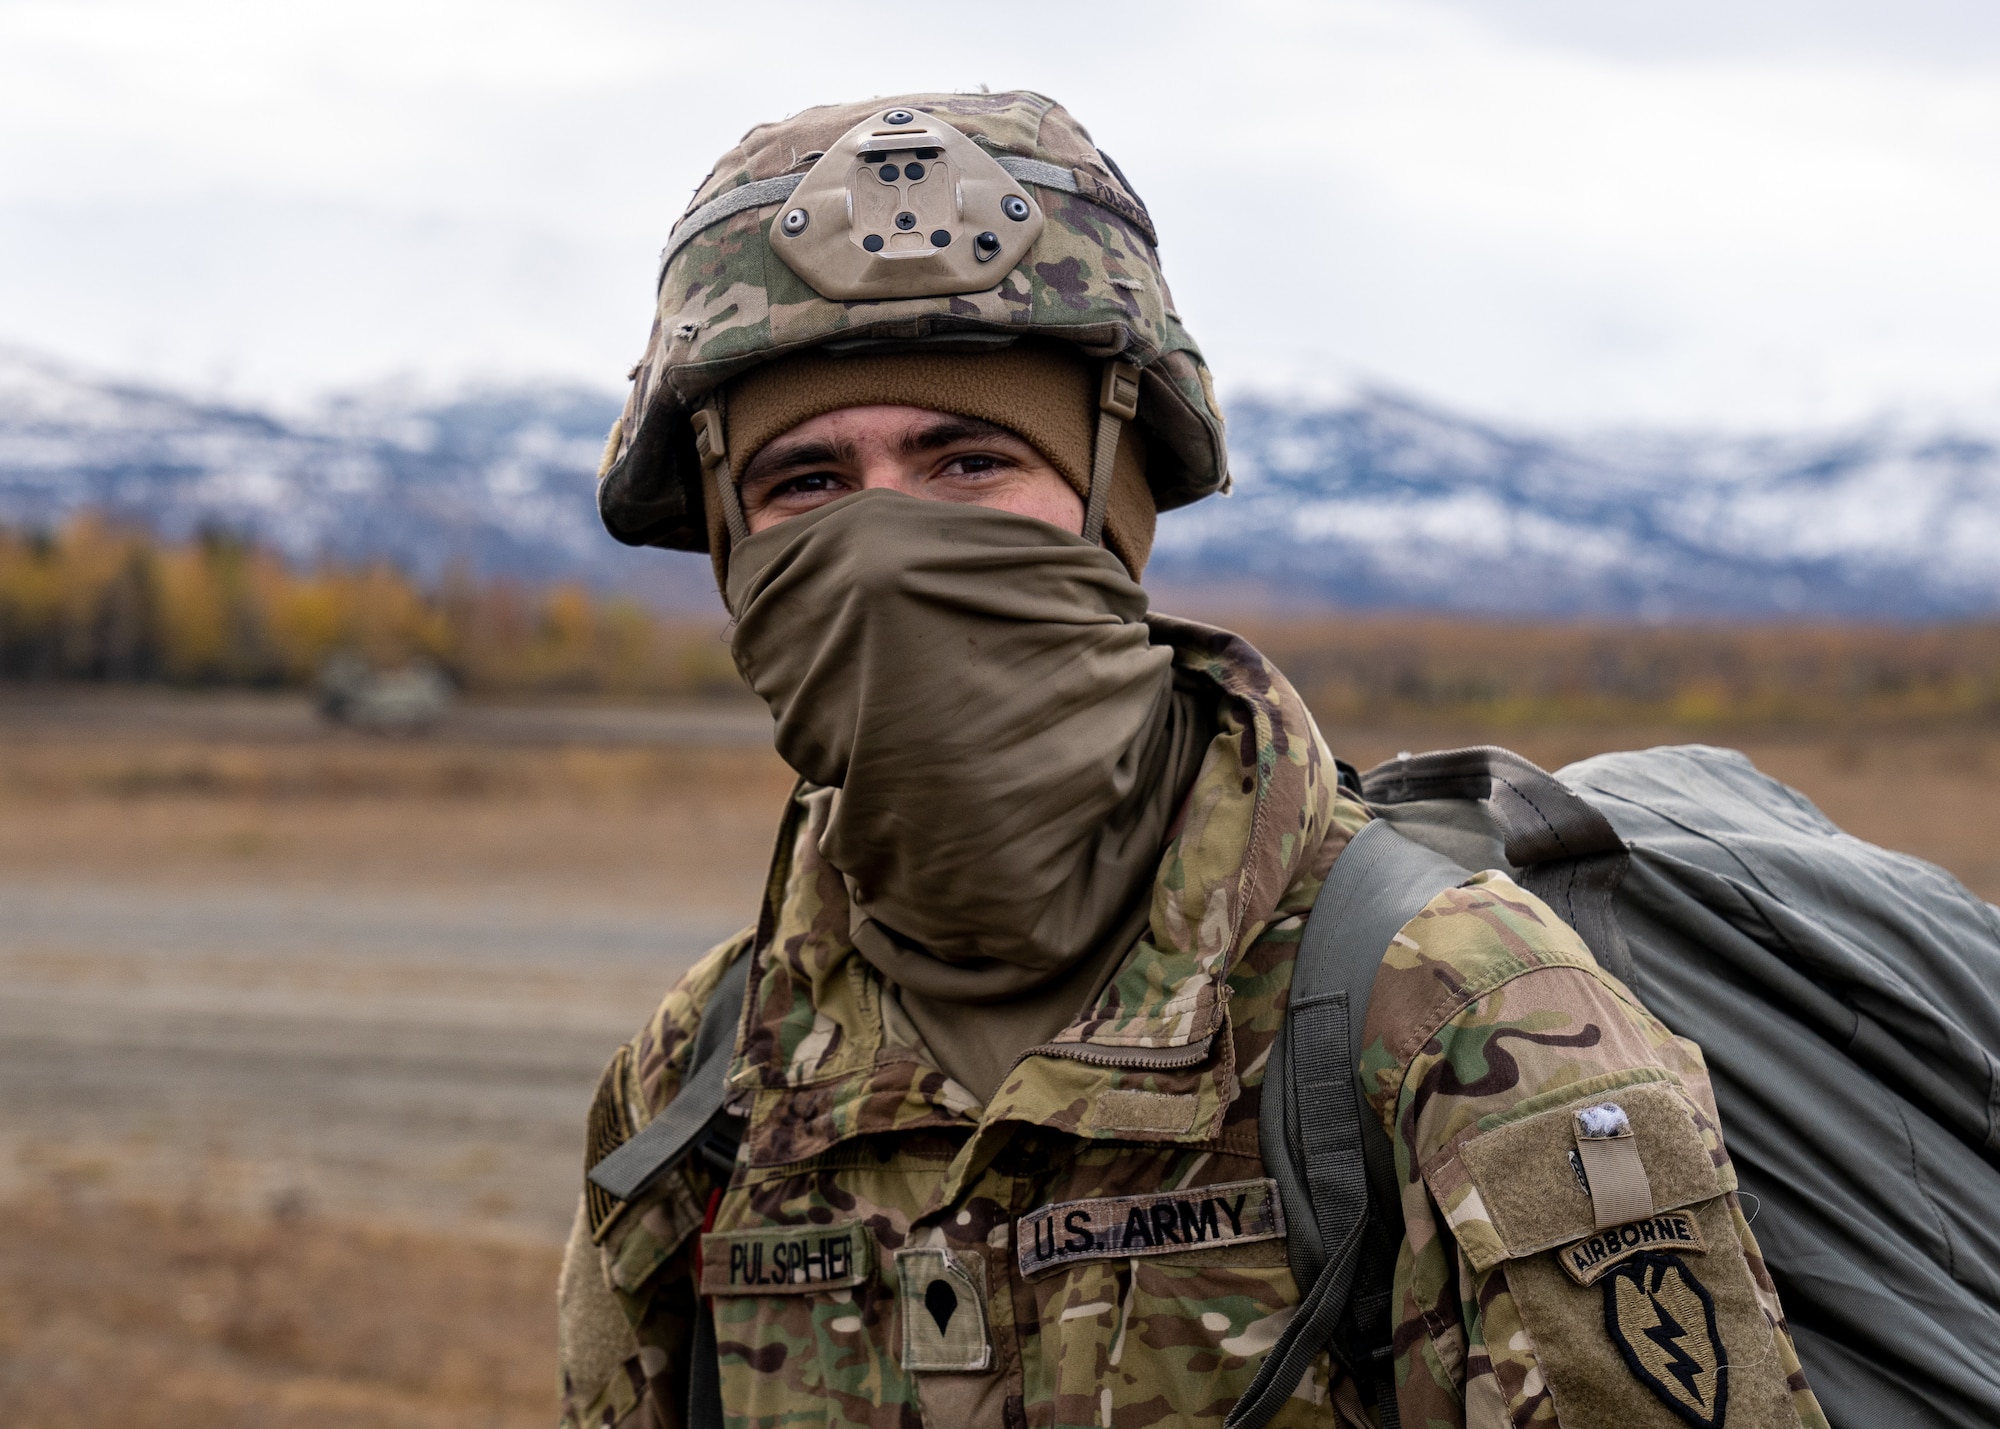 U.S. Army Spc. Chris Pulsipher, a paratrooper assigned to the 1st Squadron (Airborne), 40th Cavalry Regiment, 4th Infantry Brigade Combat Team (Airborne), 25th Infantry Division, U.S. Army Alaska, smiles after successfully jumping from a CH-47 Chinook.